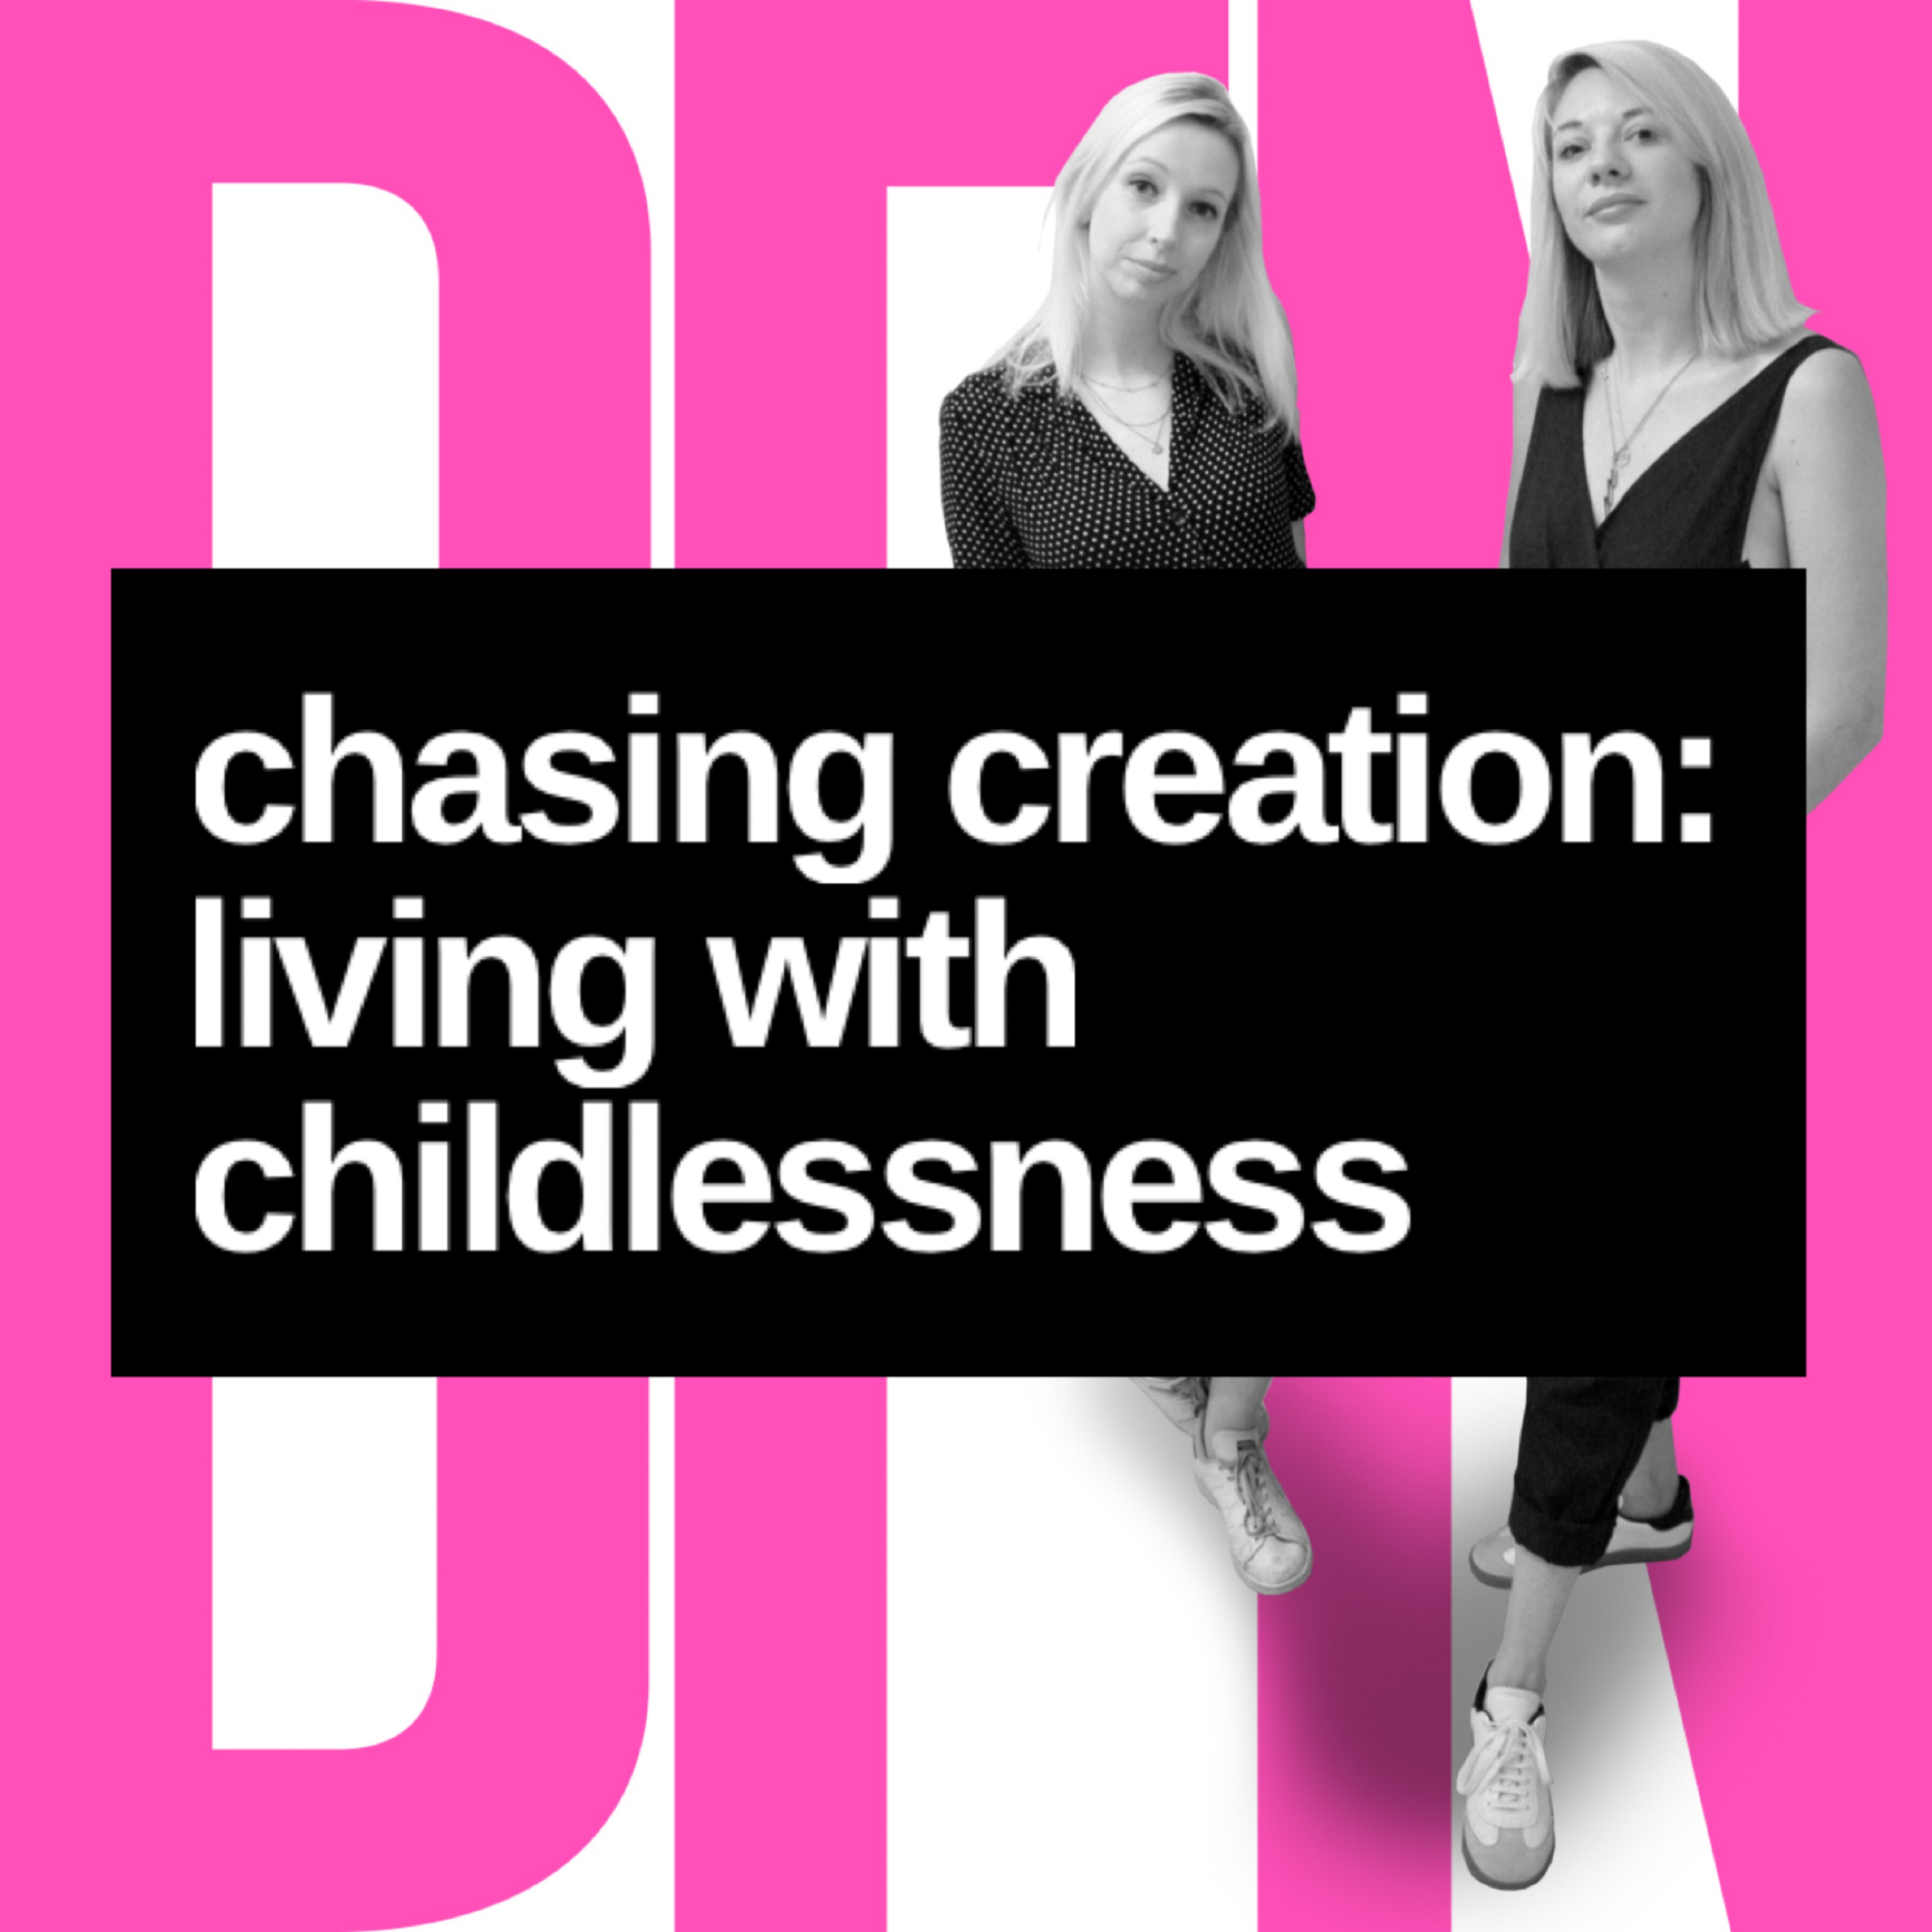 Chasing Creation: Living with childlessness